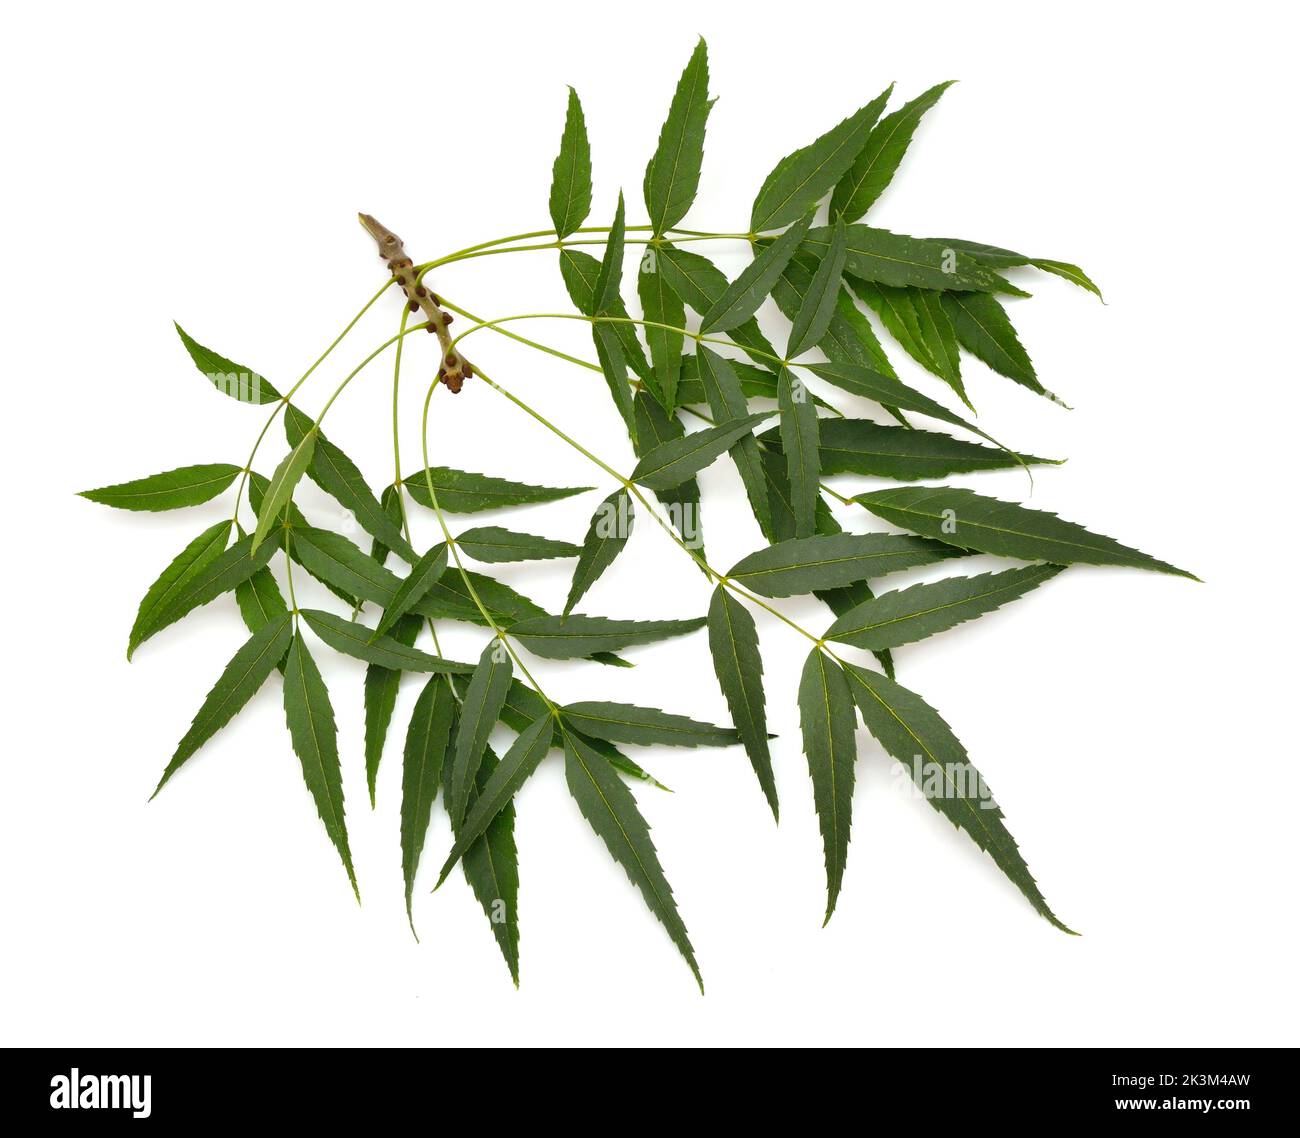 Fraxinus angustifolia, the narrow-leaved ash. Isolated on white. Stock Photo